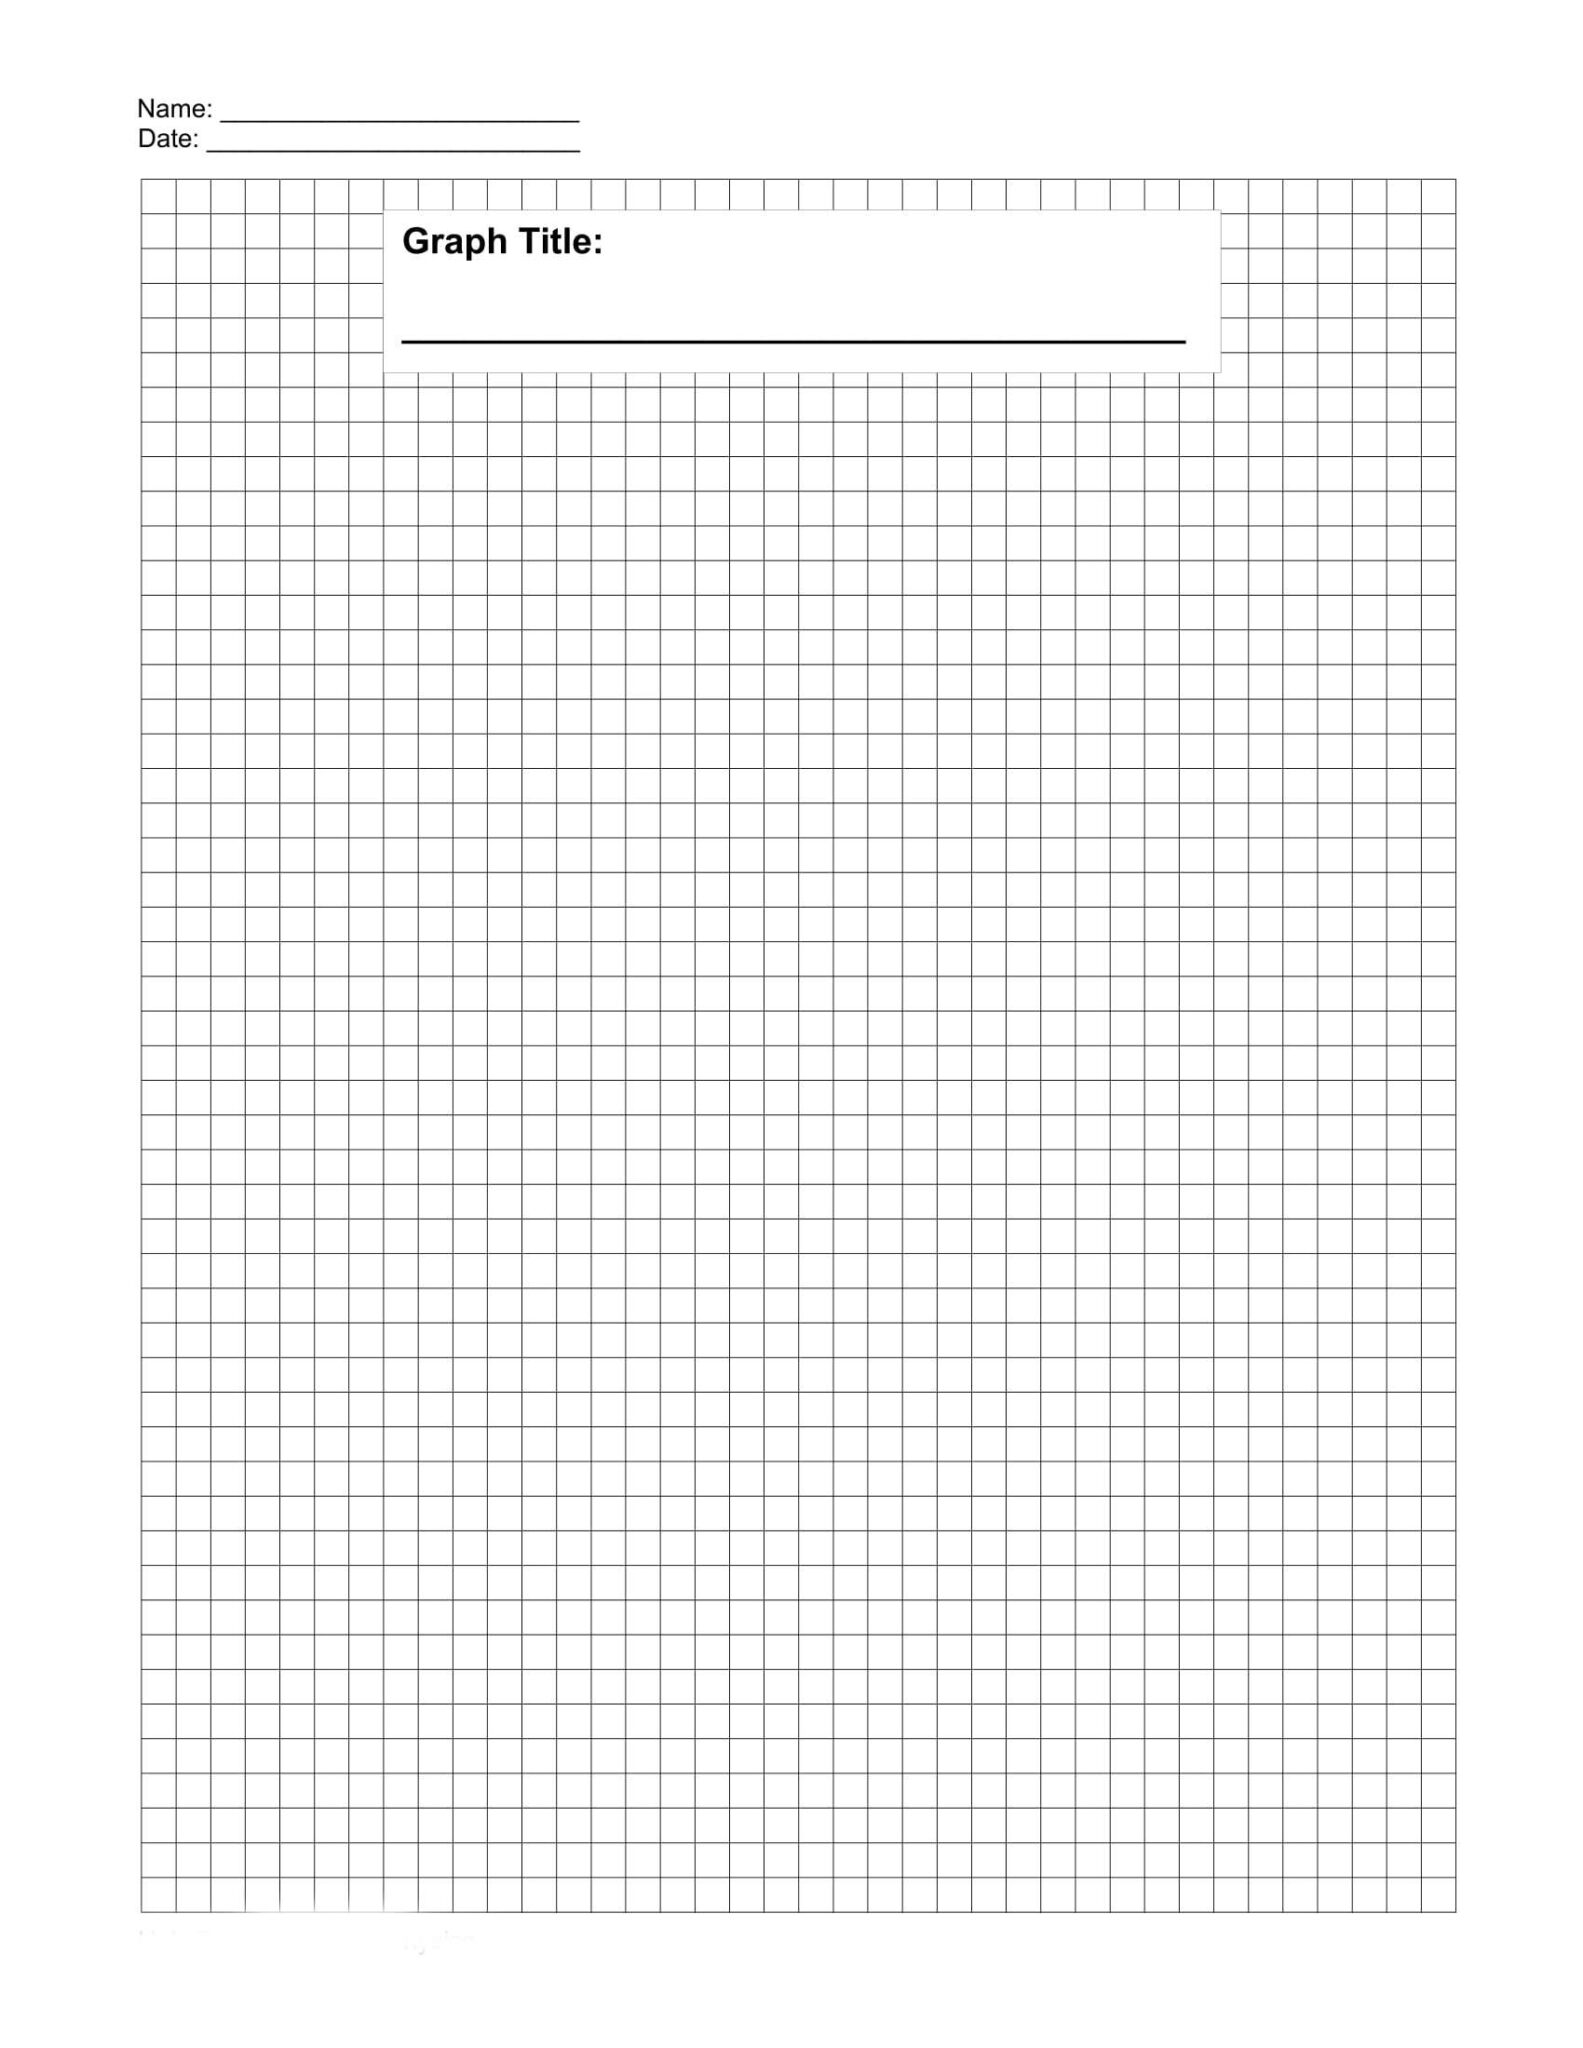 30+ Free Printable Graph Paper Templates (Word, Pdf) ᐅ in Blank Word